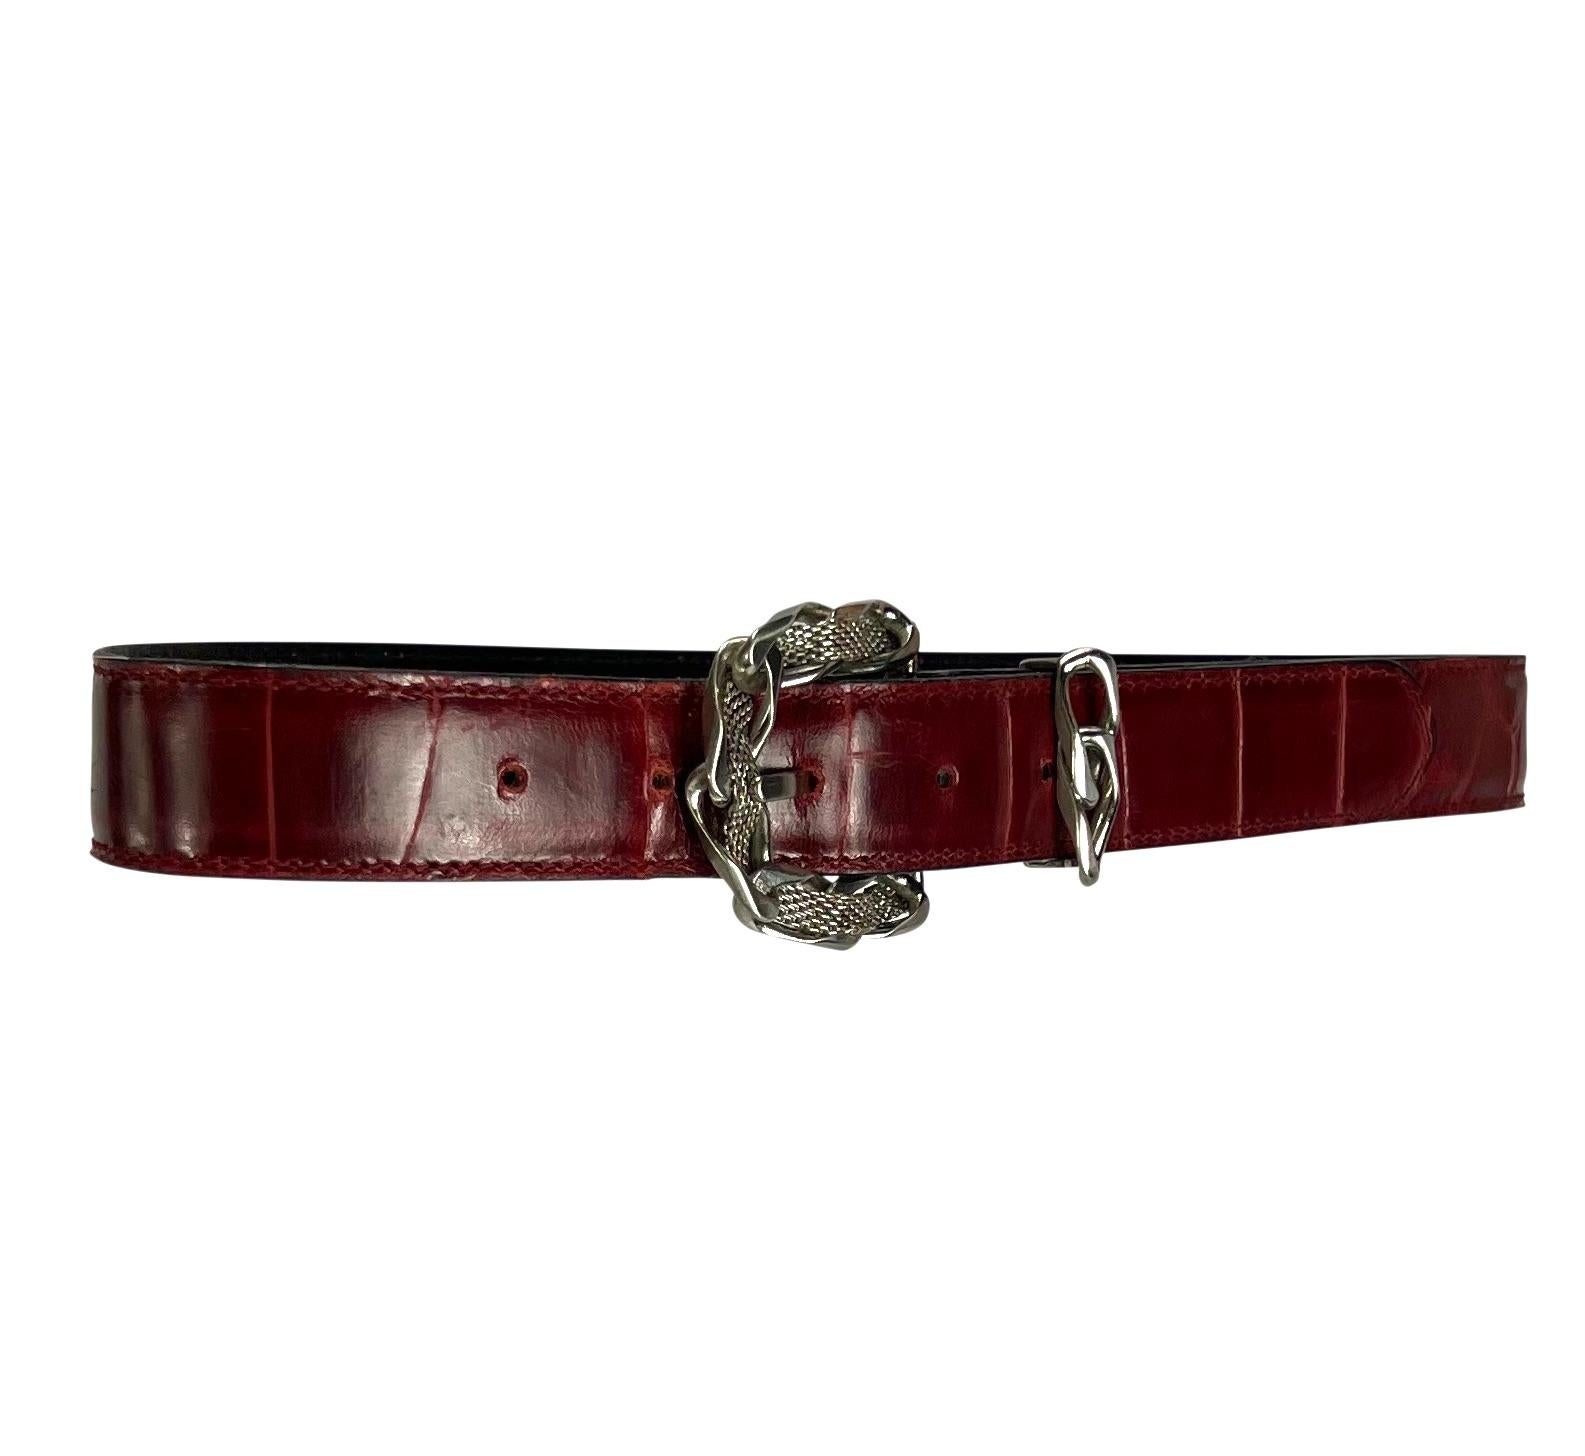 Presenting a fabulous red crocodile Gianni Versace belt designed by Gianni Versace. From the 1980s, this belt is complete with a chain belt buckle with metal mesh woven between the links. 

Approximate Measurements: 
Length: 25.5